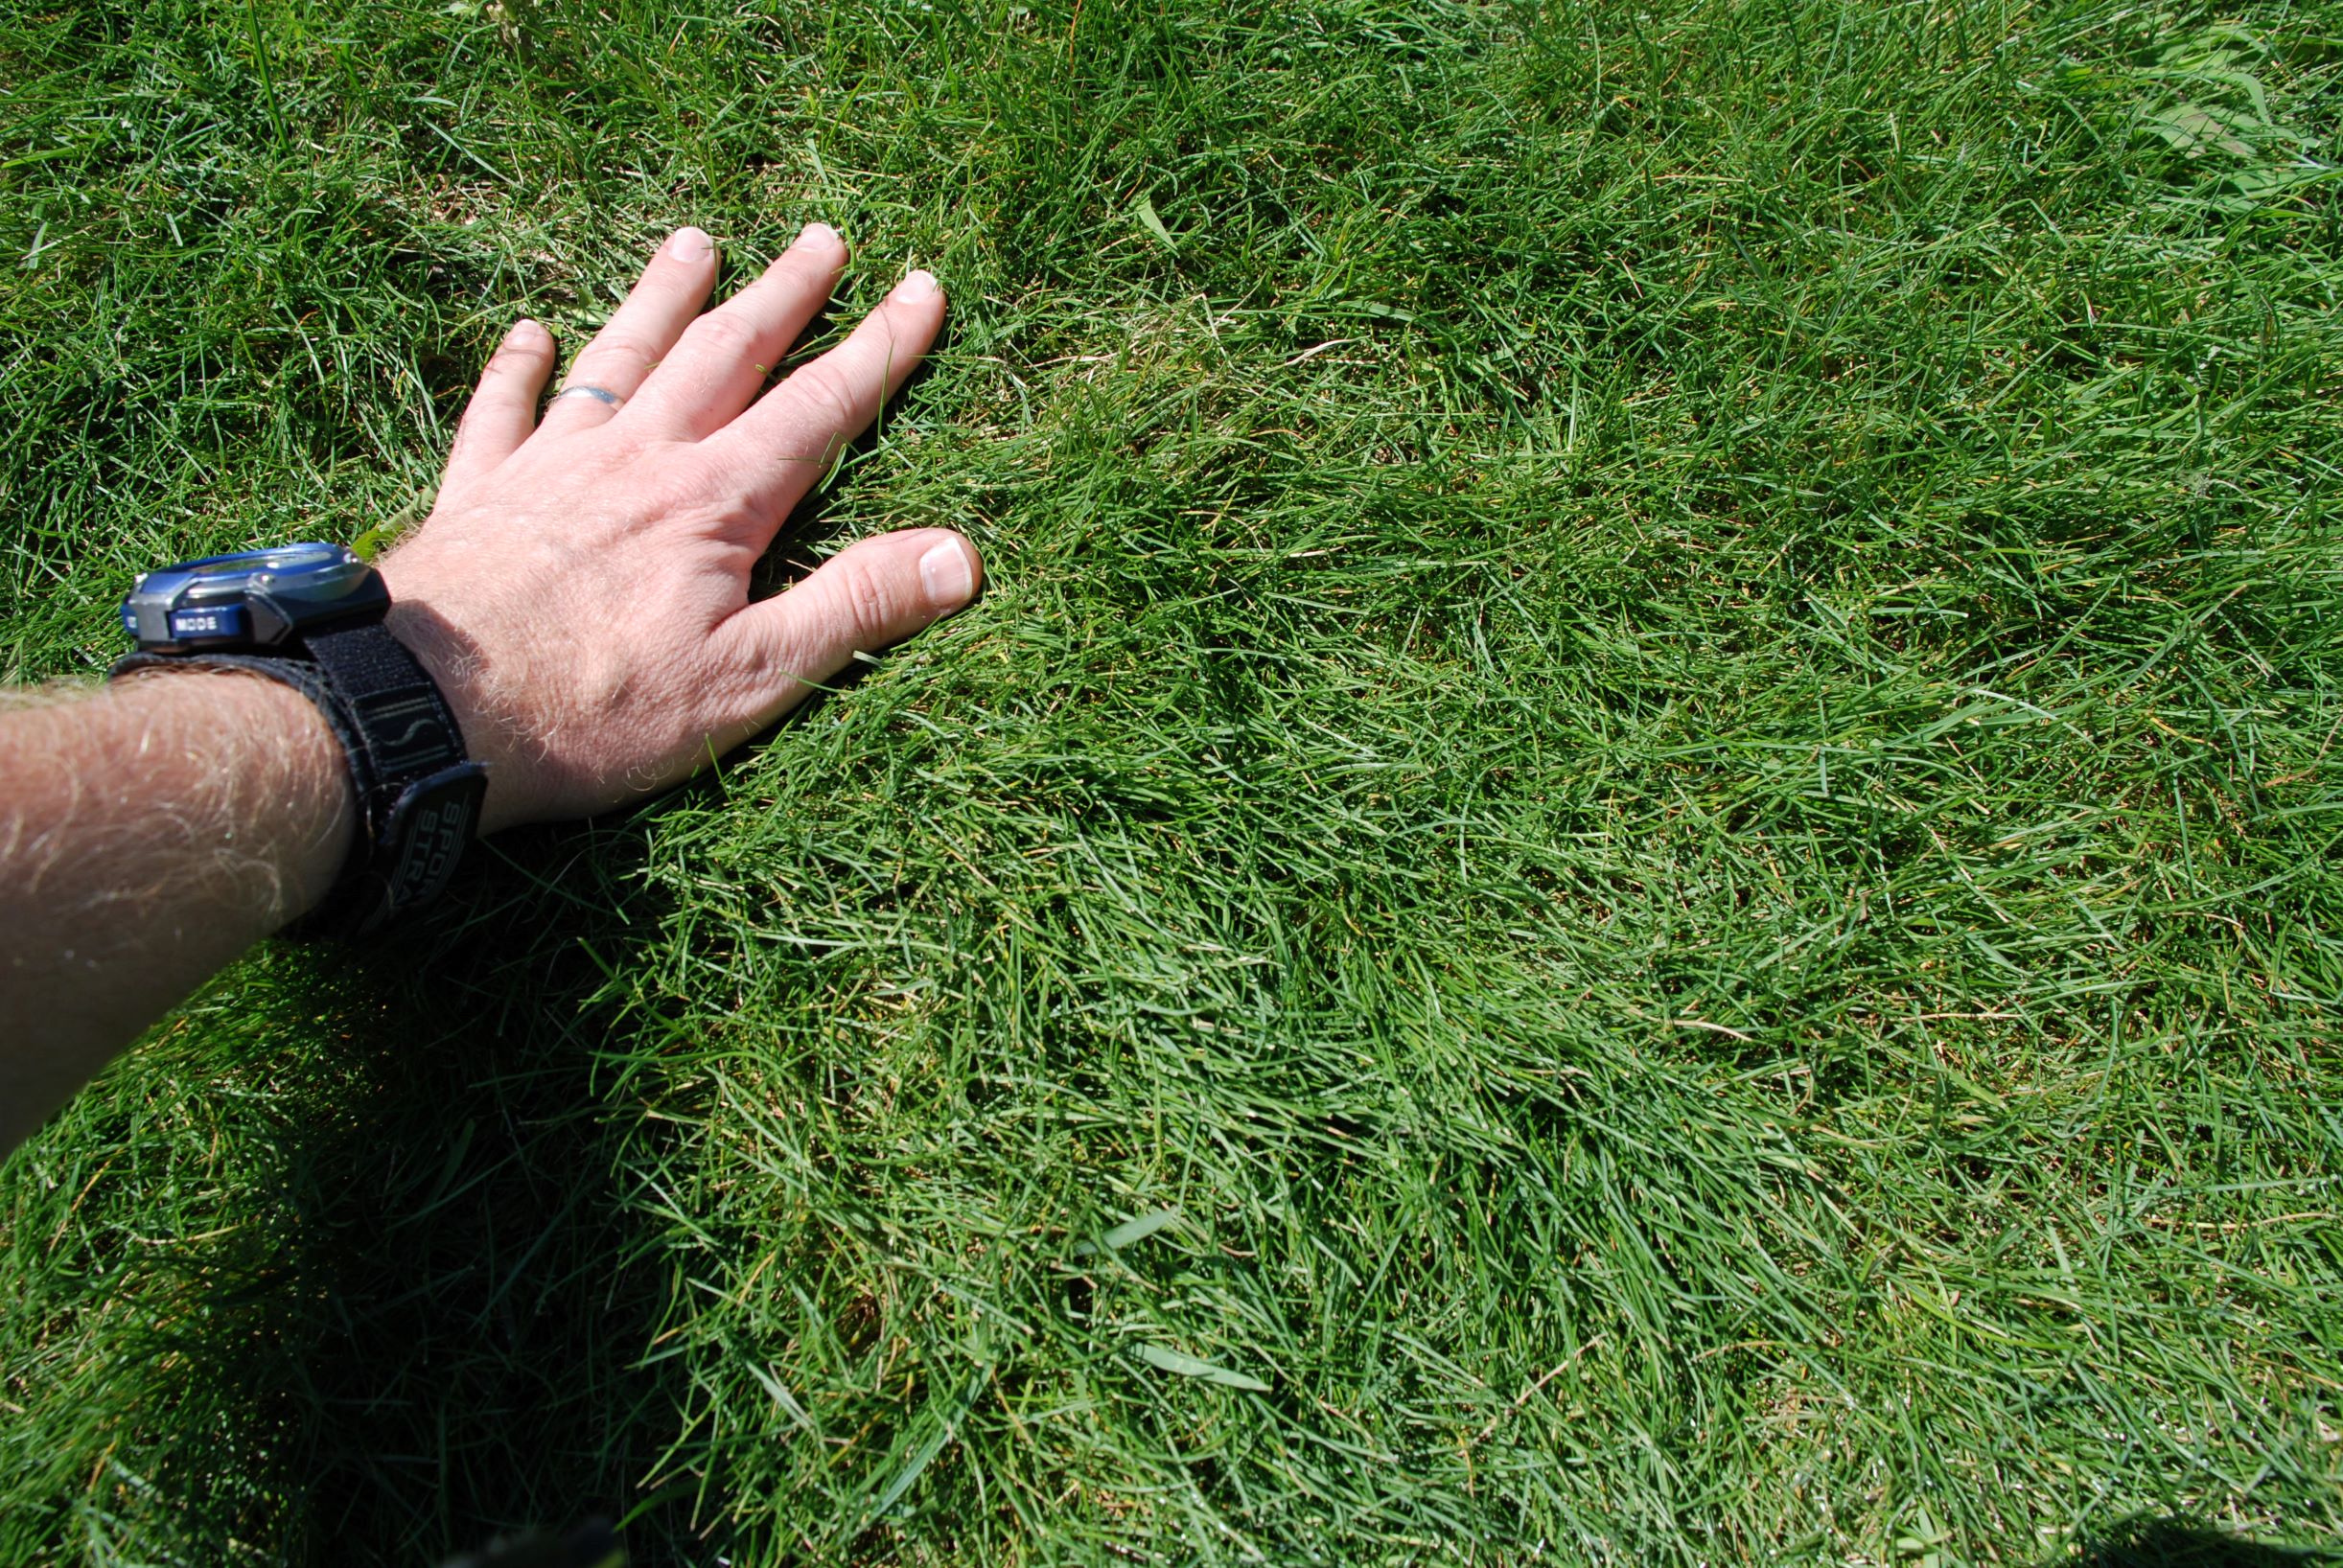 a person's hand touching a lawn consisting of fine-textured turfgrass